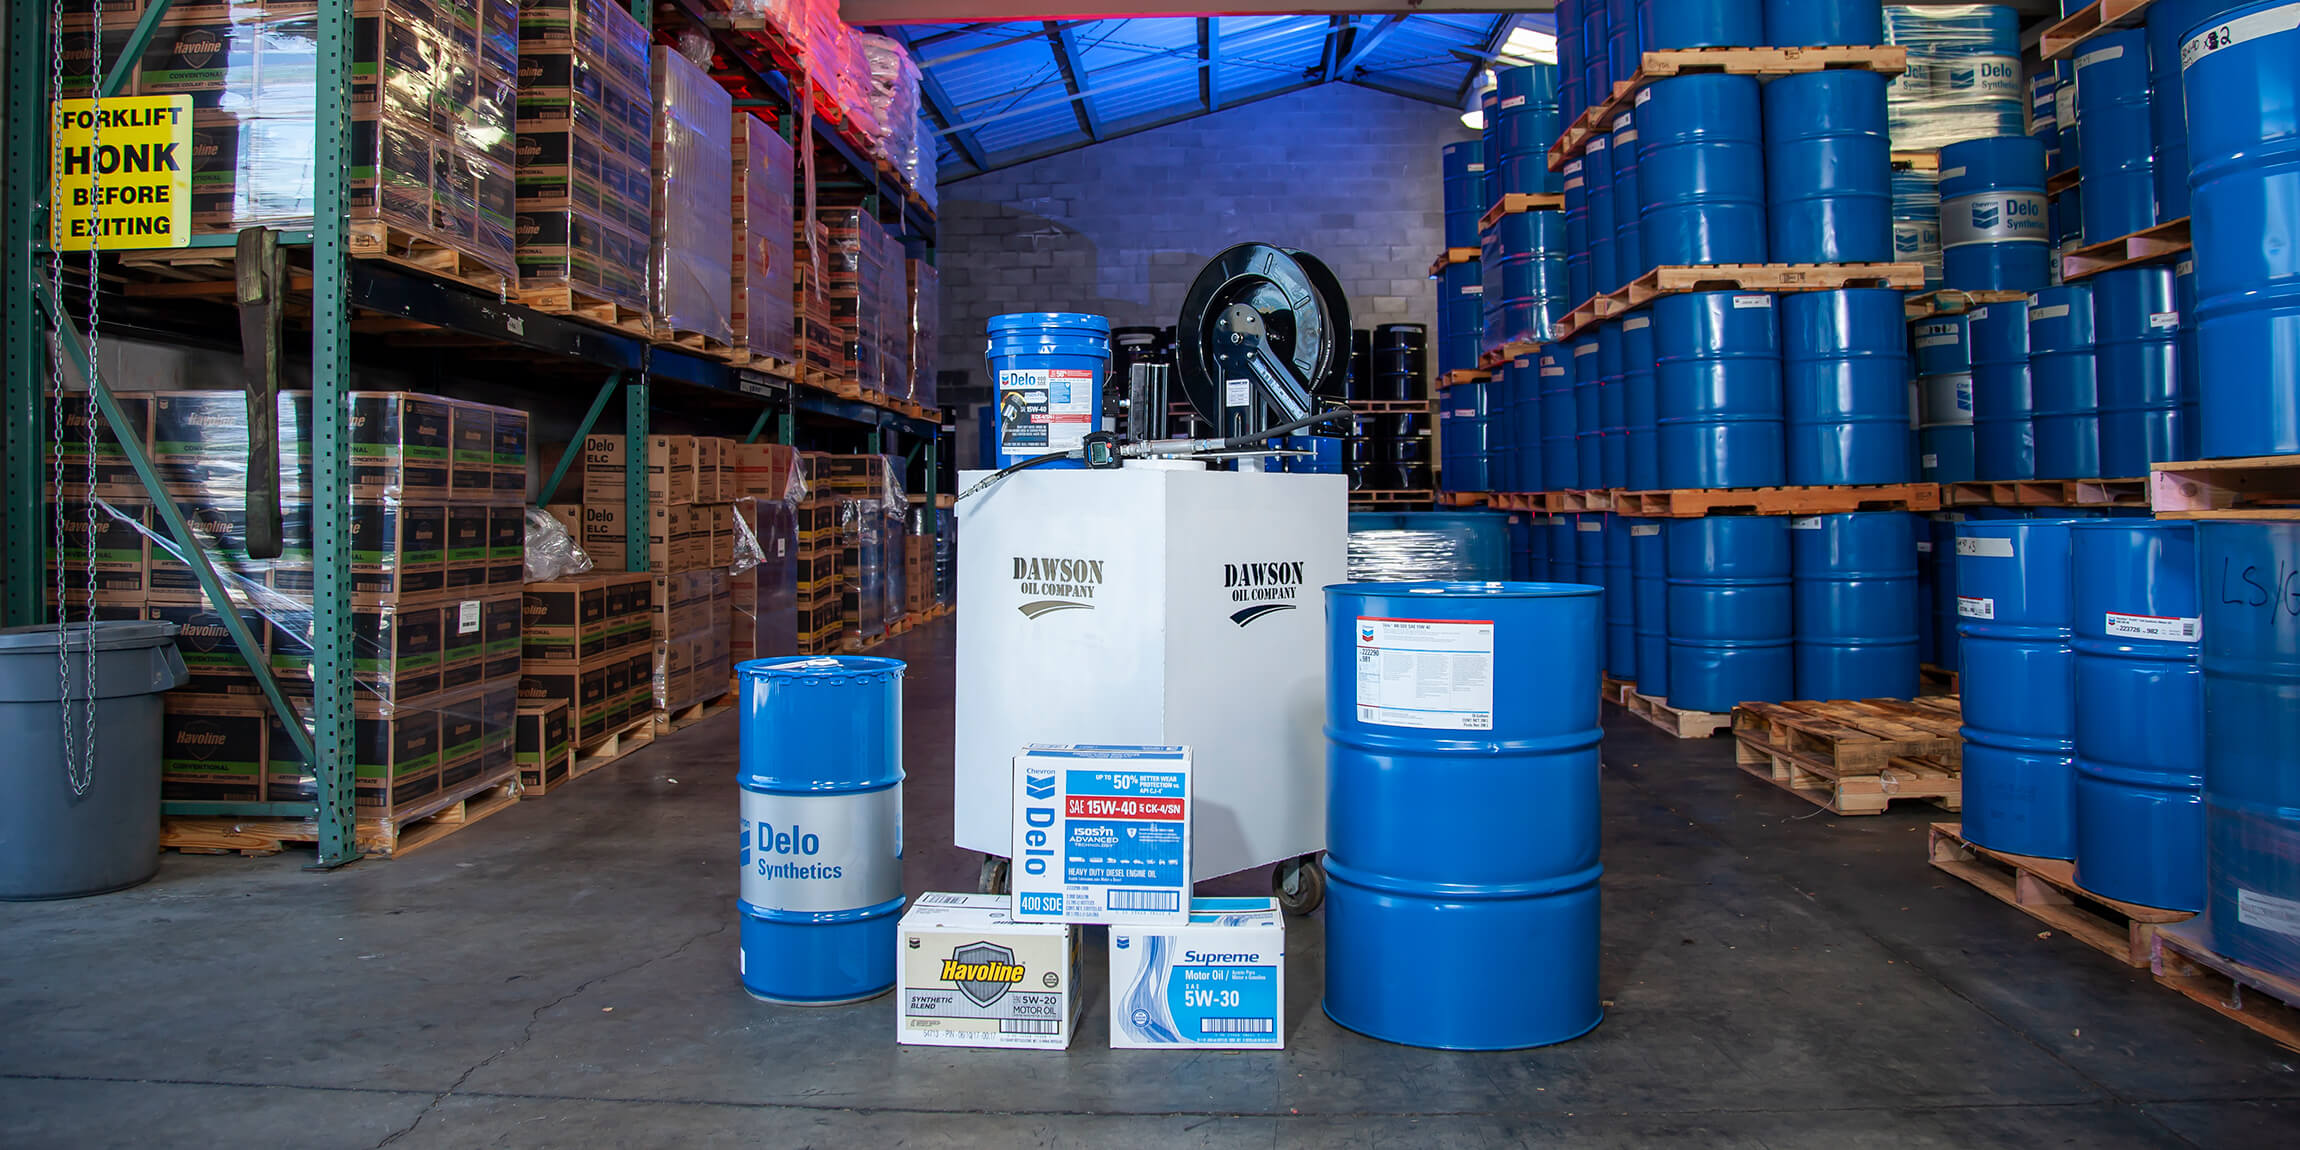 Our products guarantee the highest levels of safety and efficiency. Let our STLE-certified staff help you select the right lubricants for your equipment.